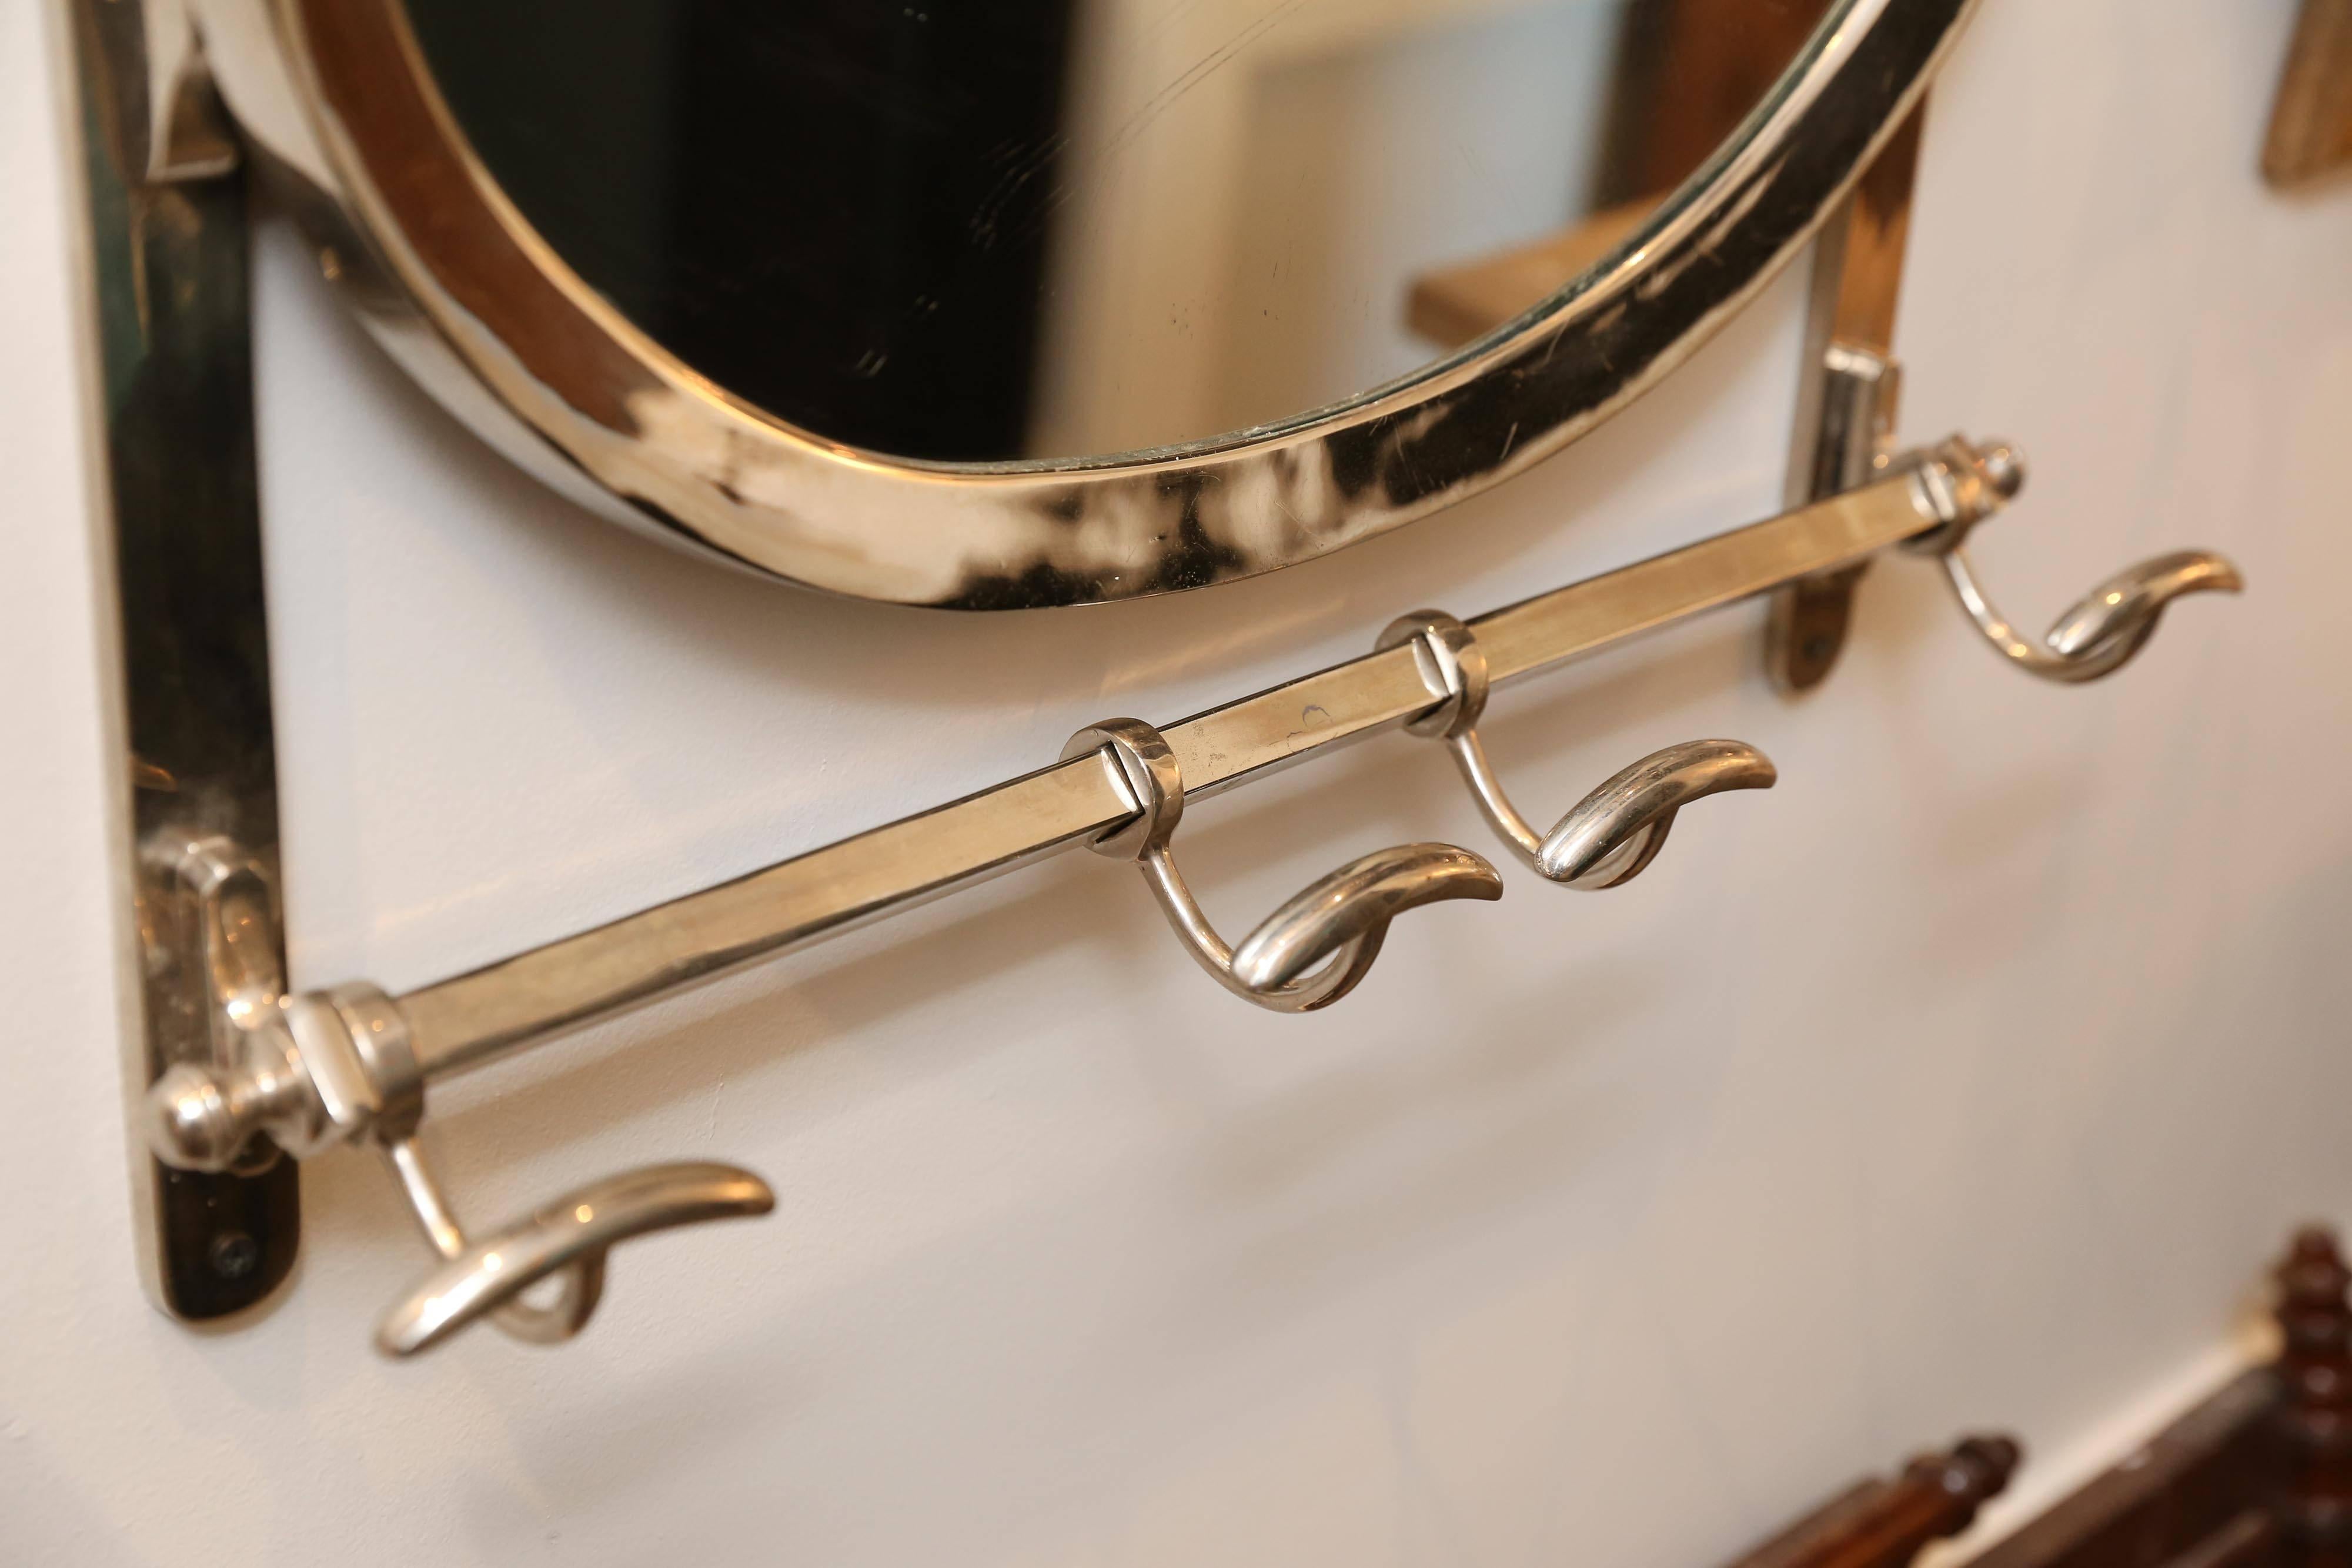 From France, a striking chrome hanging hat/coat rack with a stationary mirror. With four sliding hooks for coats and an upper shelf for hats, this piece has tremendous impact and evokes a more glamorous time. The surface has only minor aging and